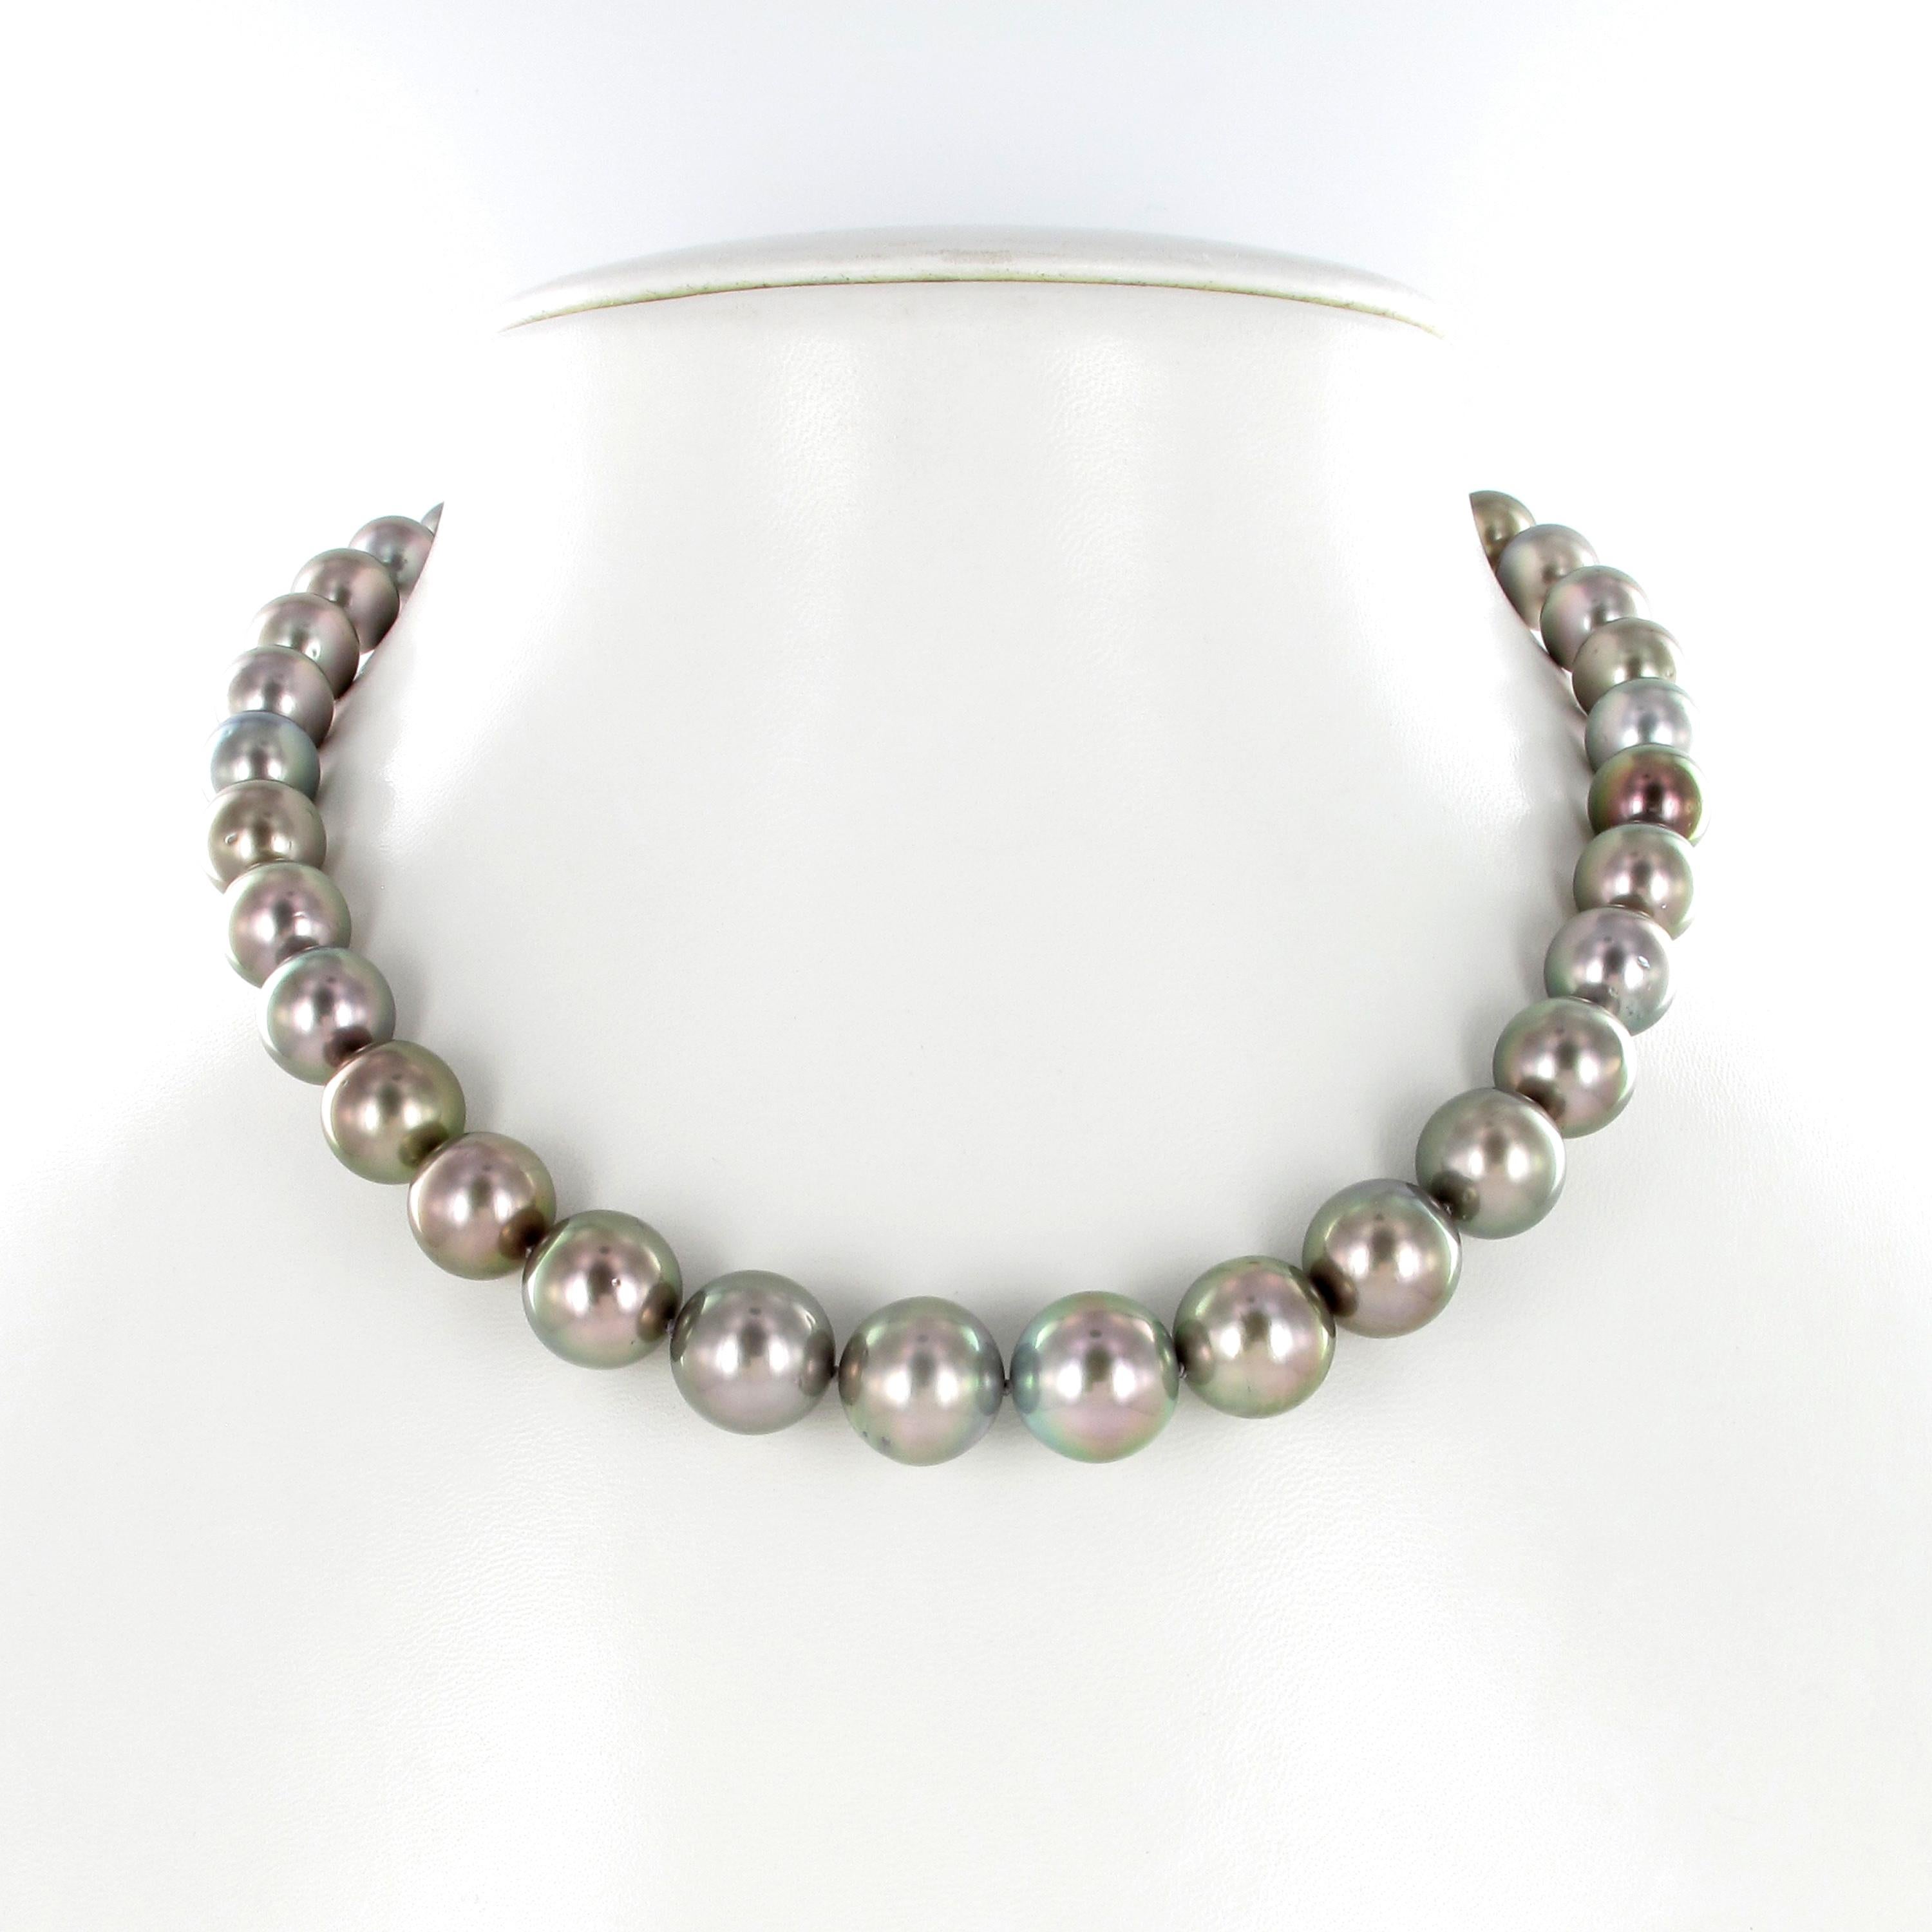 This strand consists of 36 round to slightly near round Tahitian cultured pearls graduating from 10.1 mm to 14.8 mm.
The Body color of the pearls is a medium light gray with beautiful pink overtones. The pearls are of round to near round shapes,